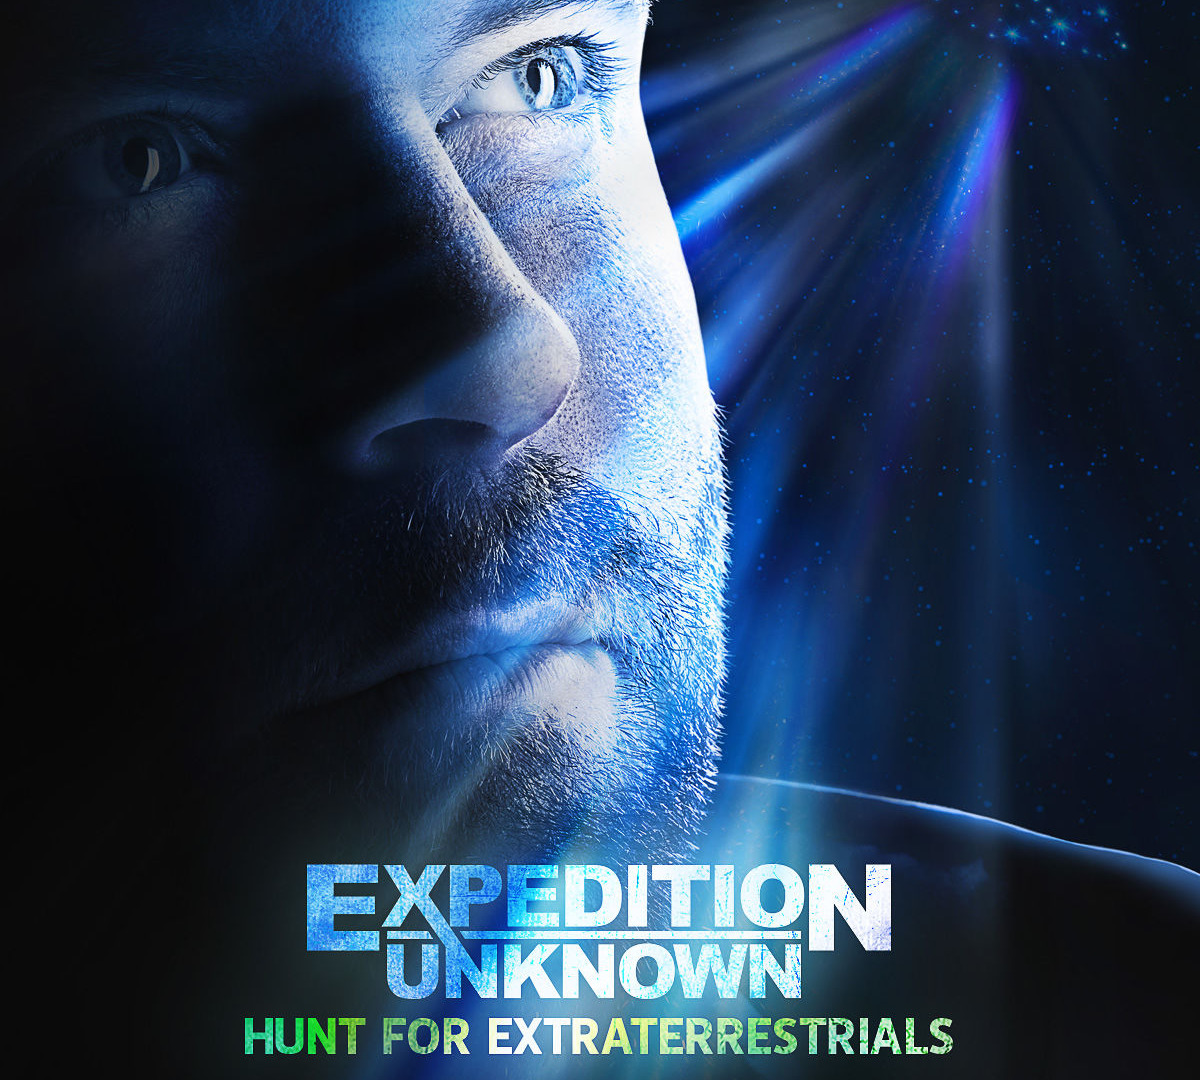 Show Expedition Unknown: Hunt for Extraterrestrials